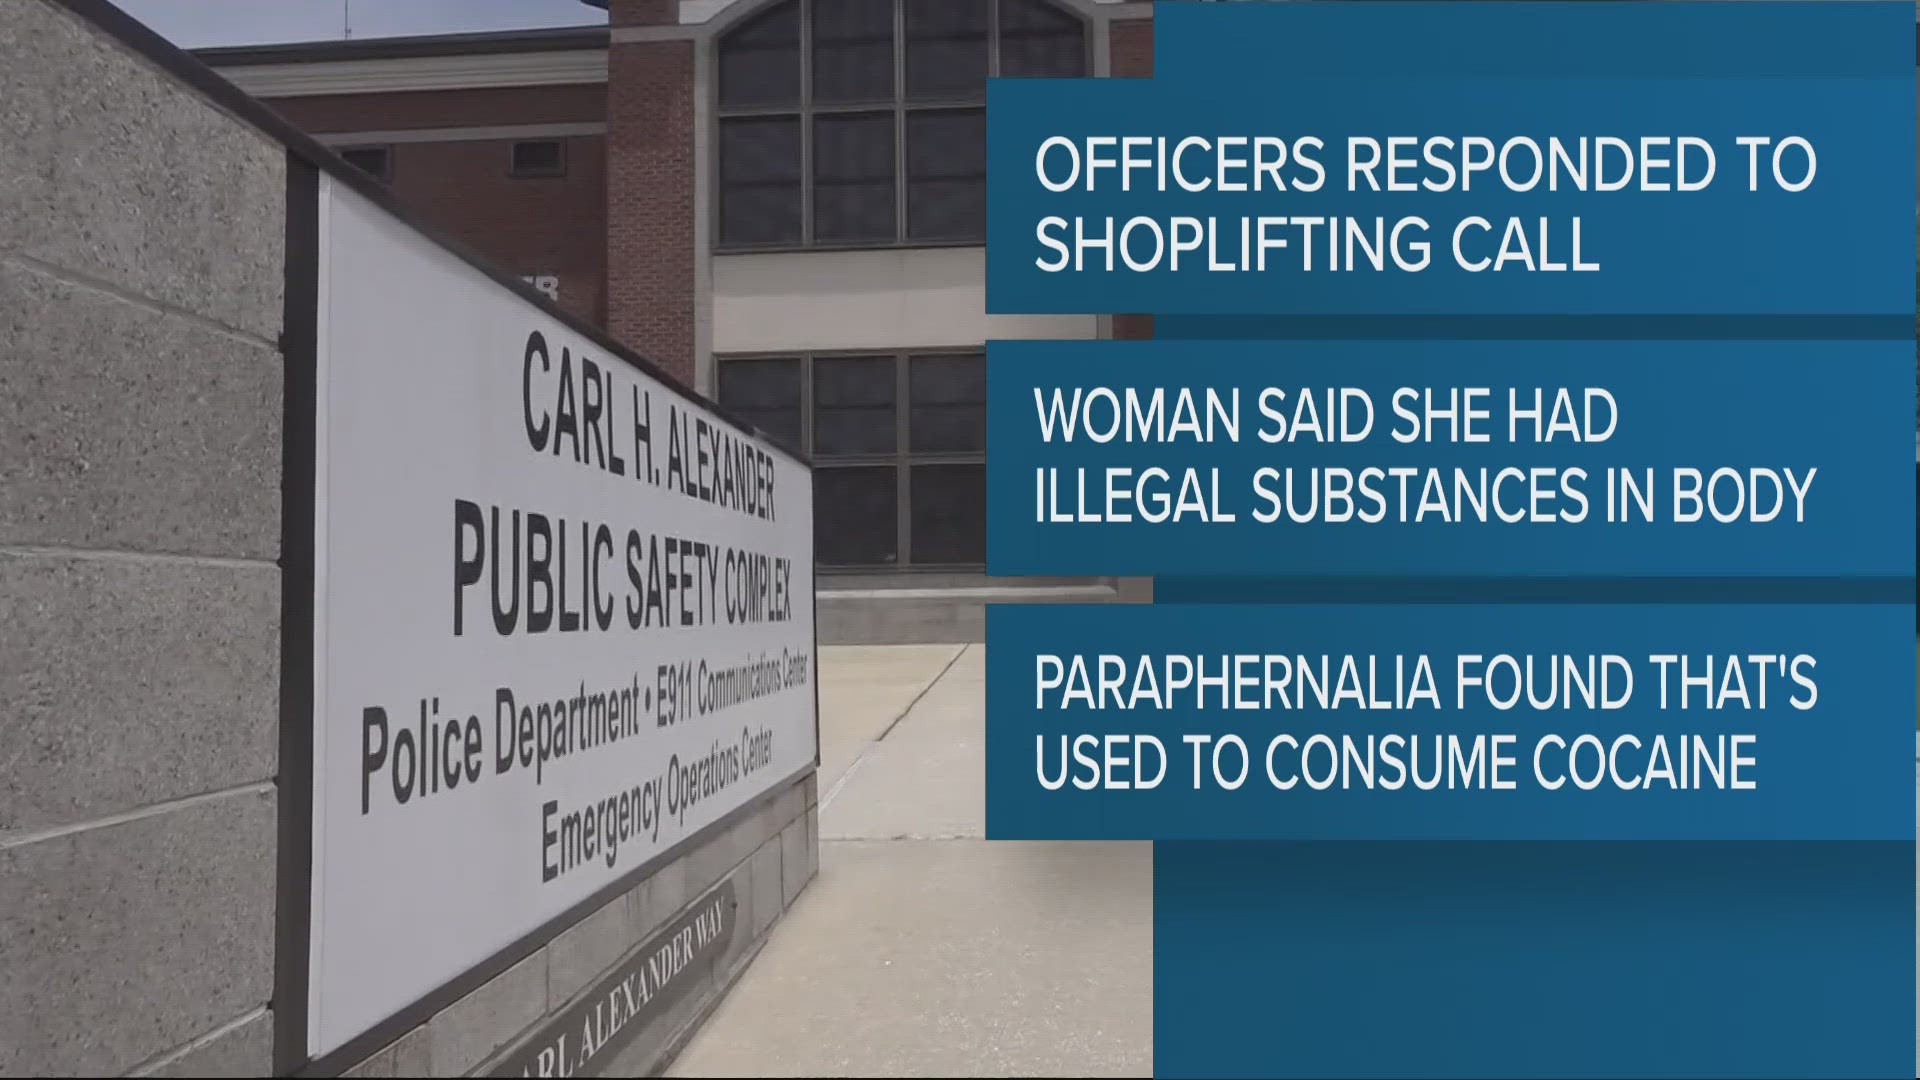 A press release from GCPD said that officers conducted a cavity search on a woman who may have had meth, leading to disciplinary action against two officers.